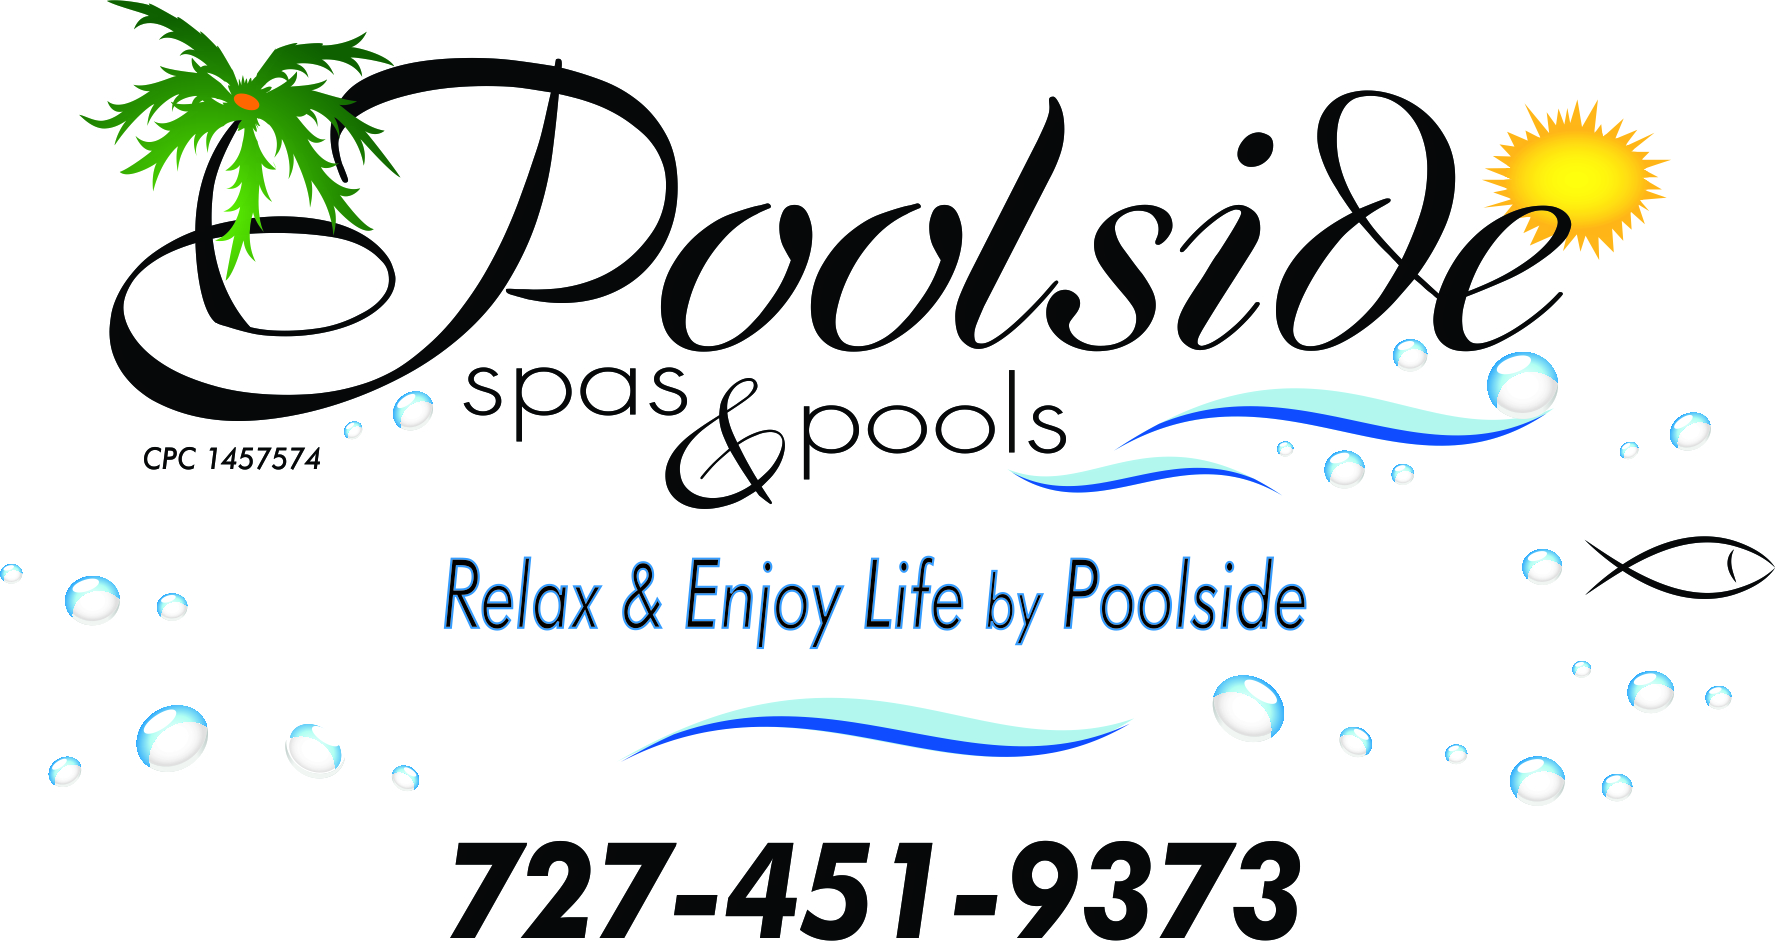 Poolside Spas and Pools Logo